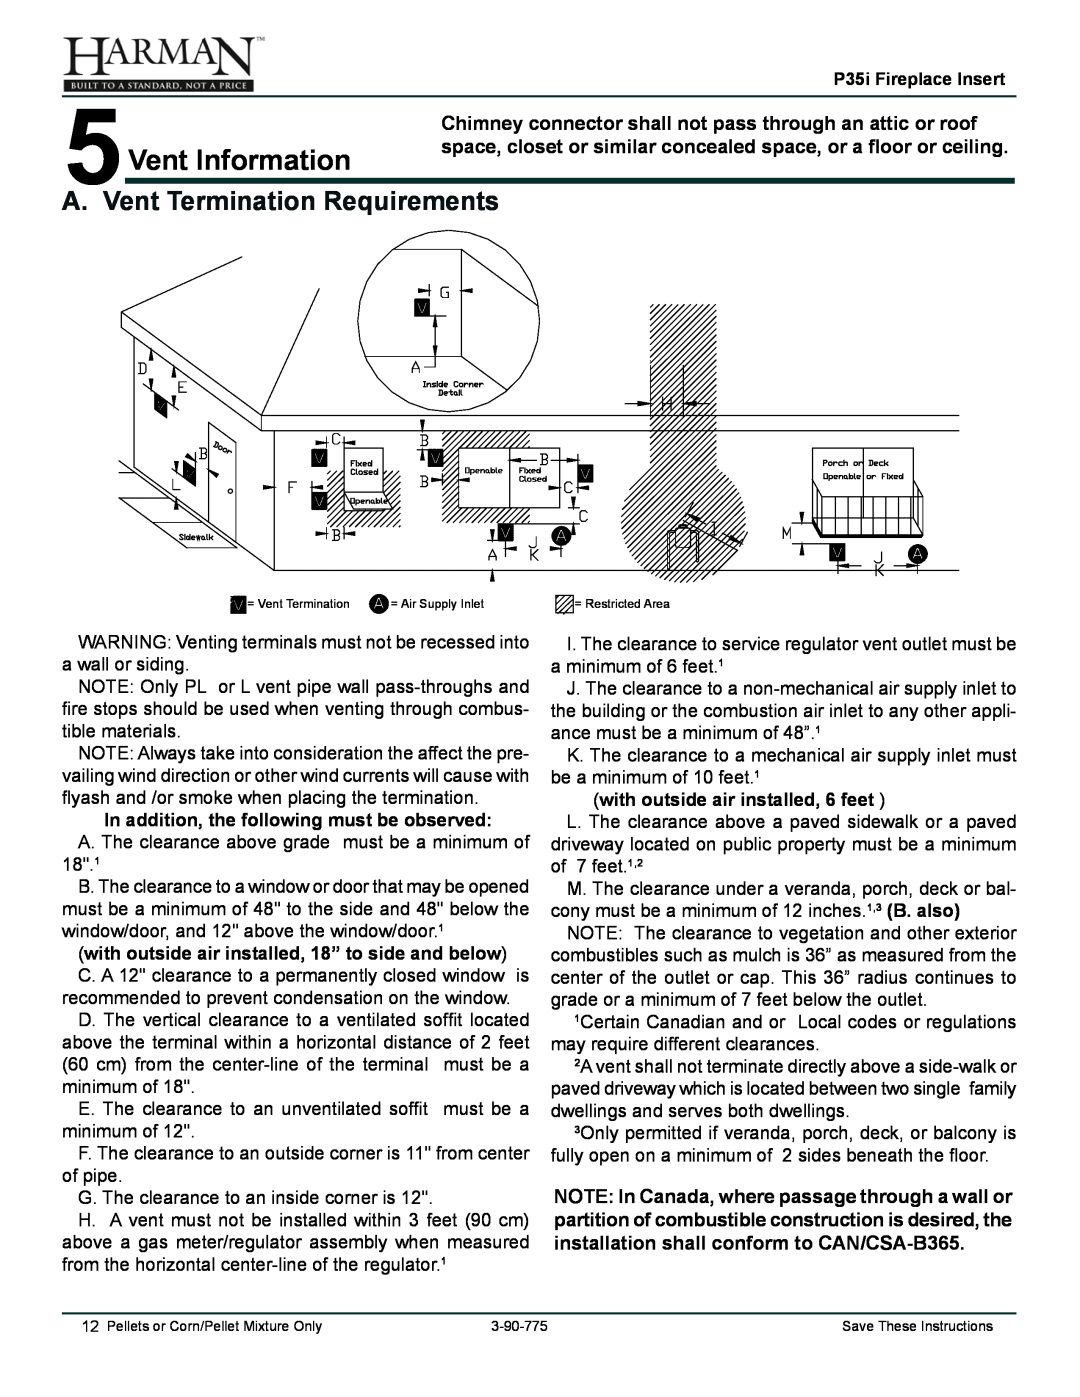 Harman Stove Company P35I owner manual Vent Information, A. Vent Termination Requirements 